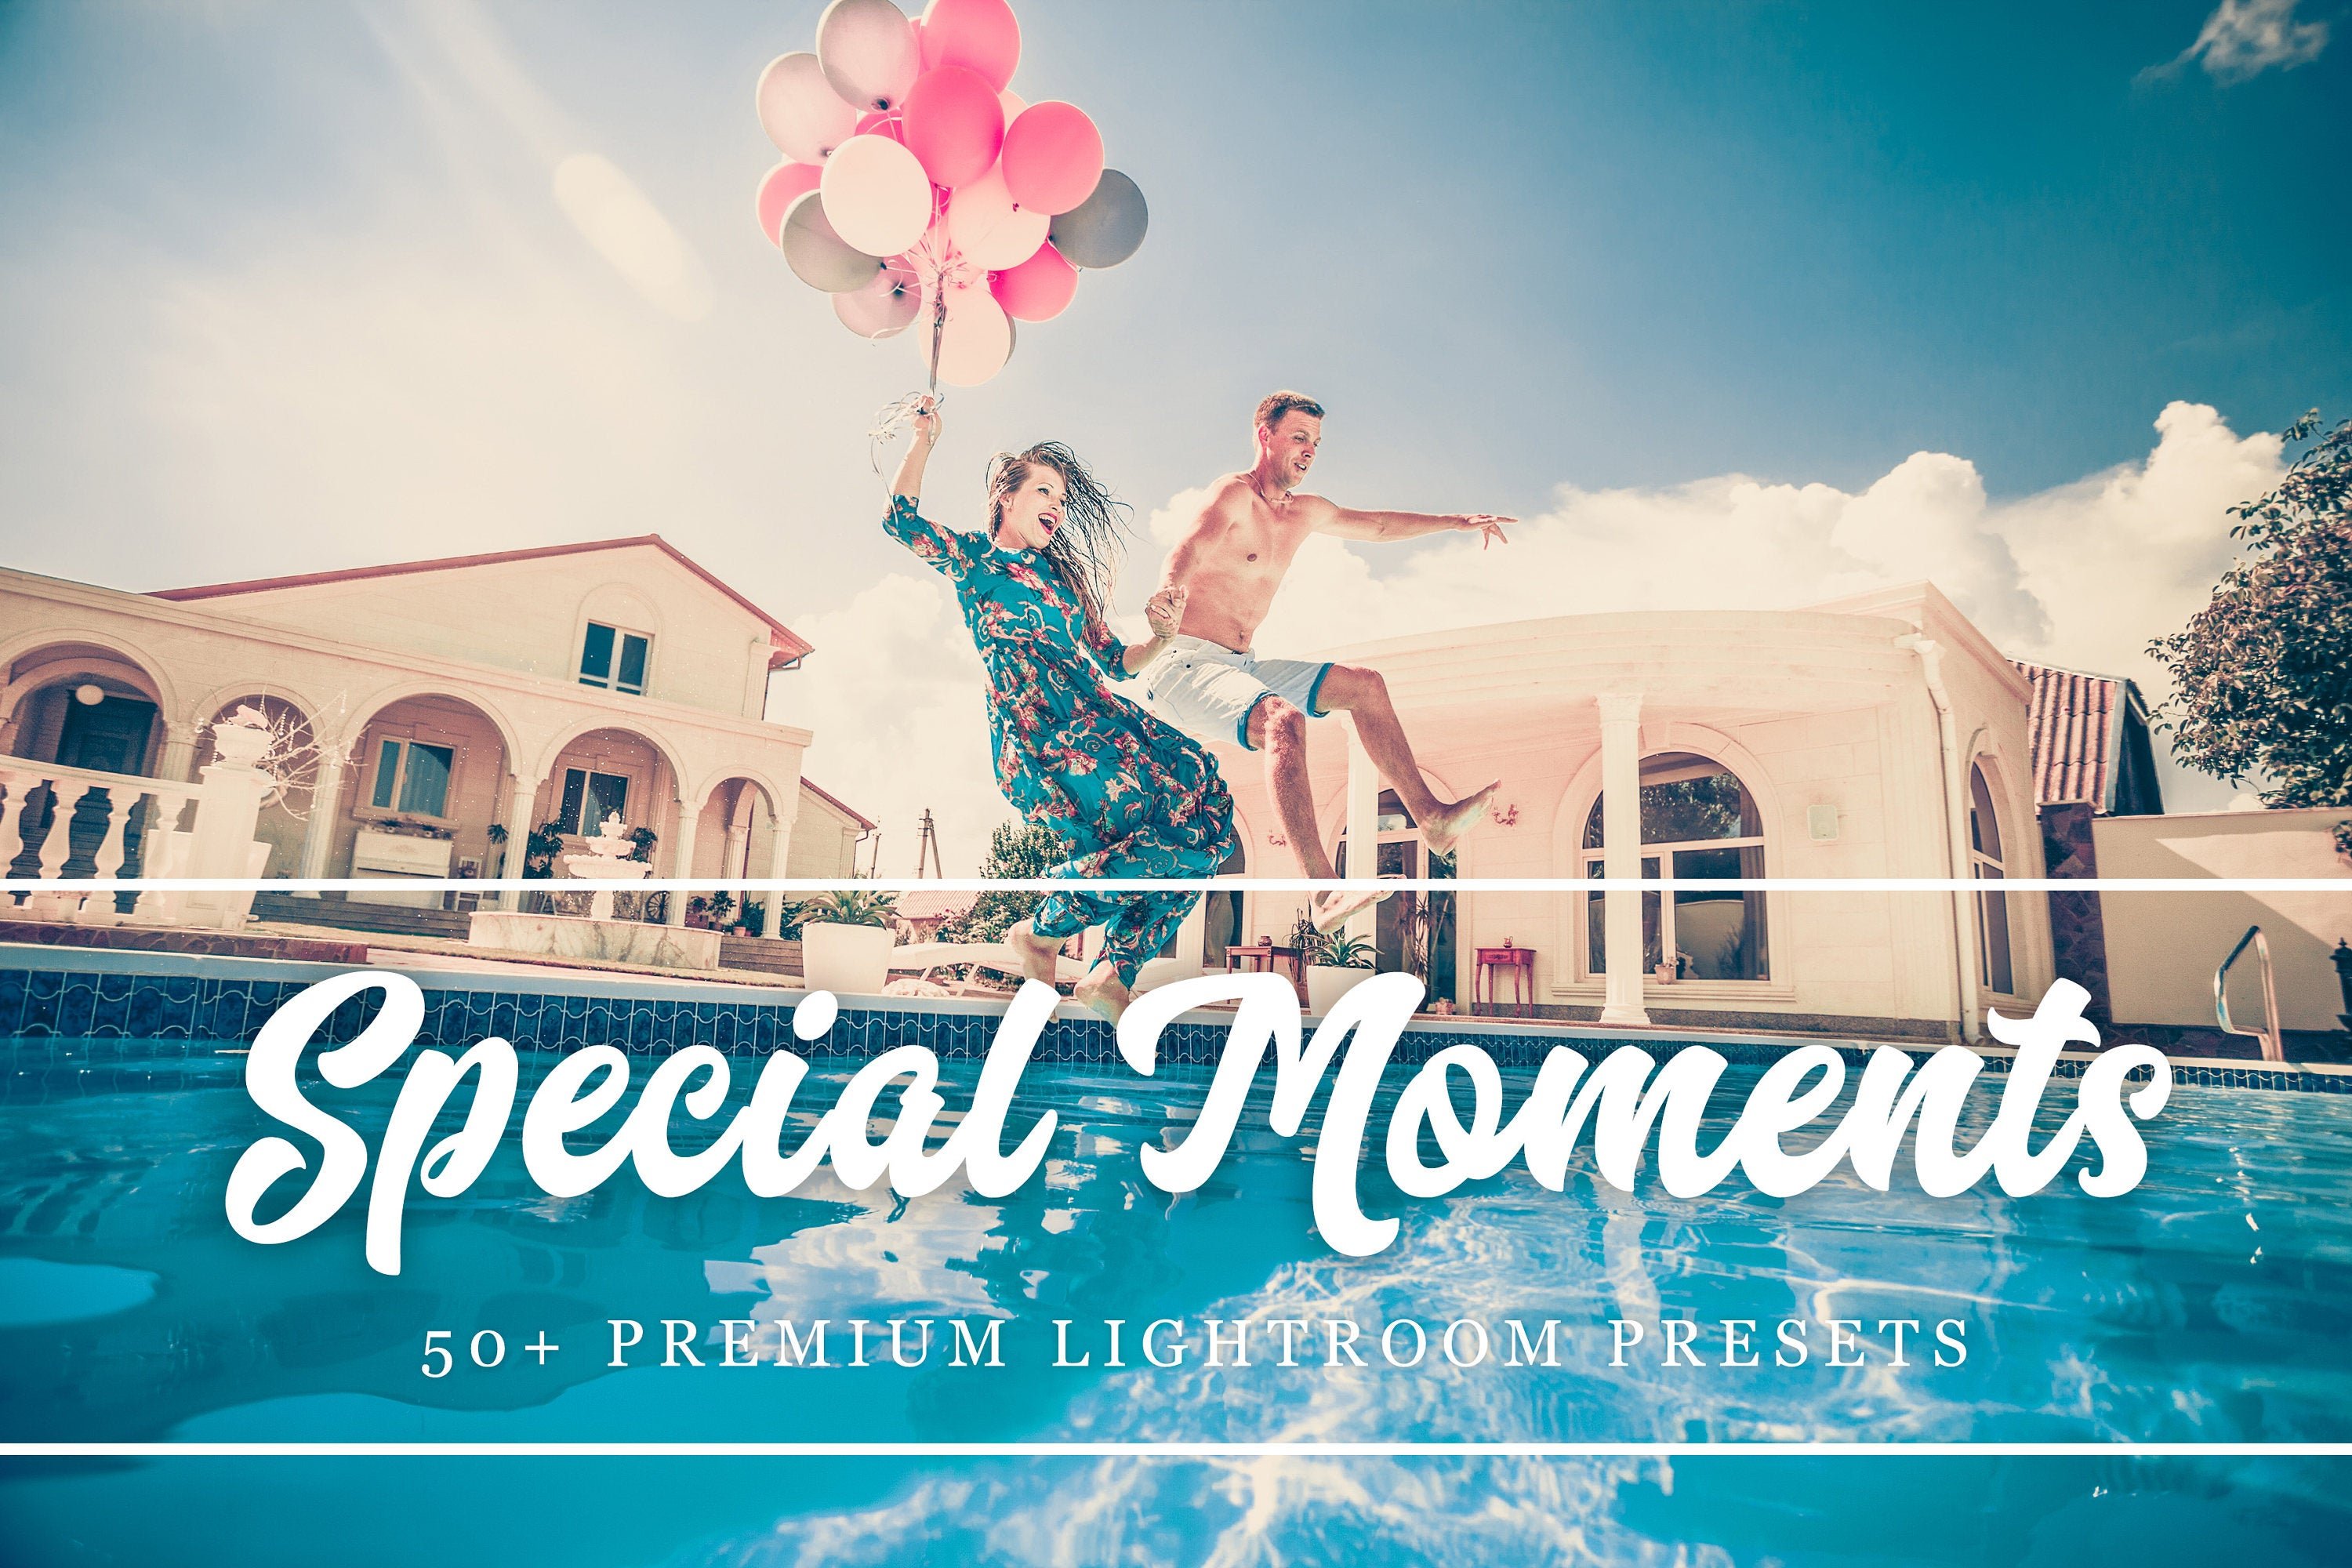 49+Special Moments Lightroom Presetscover image.